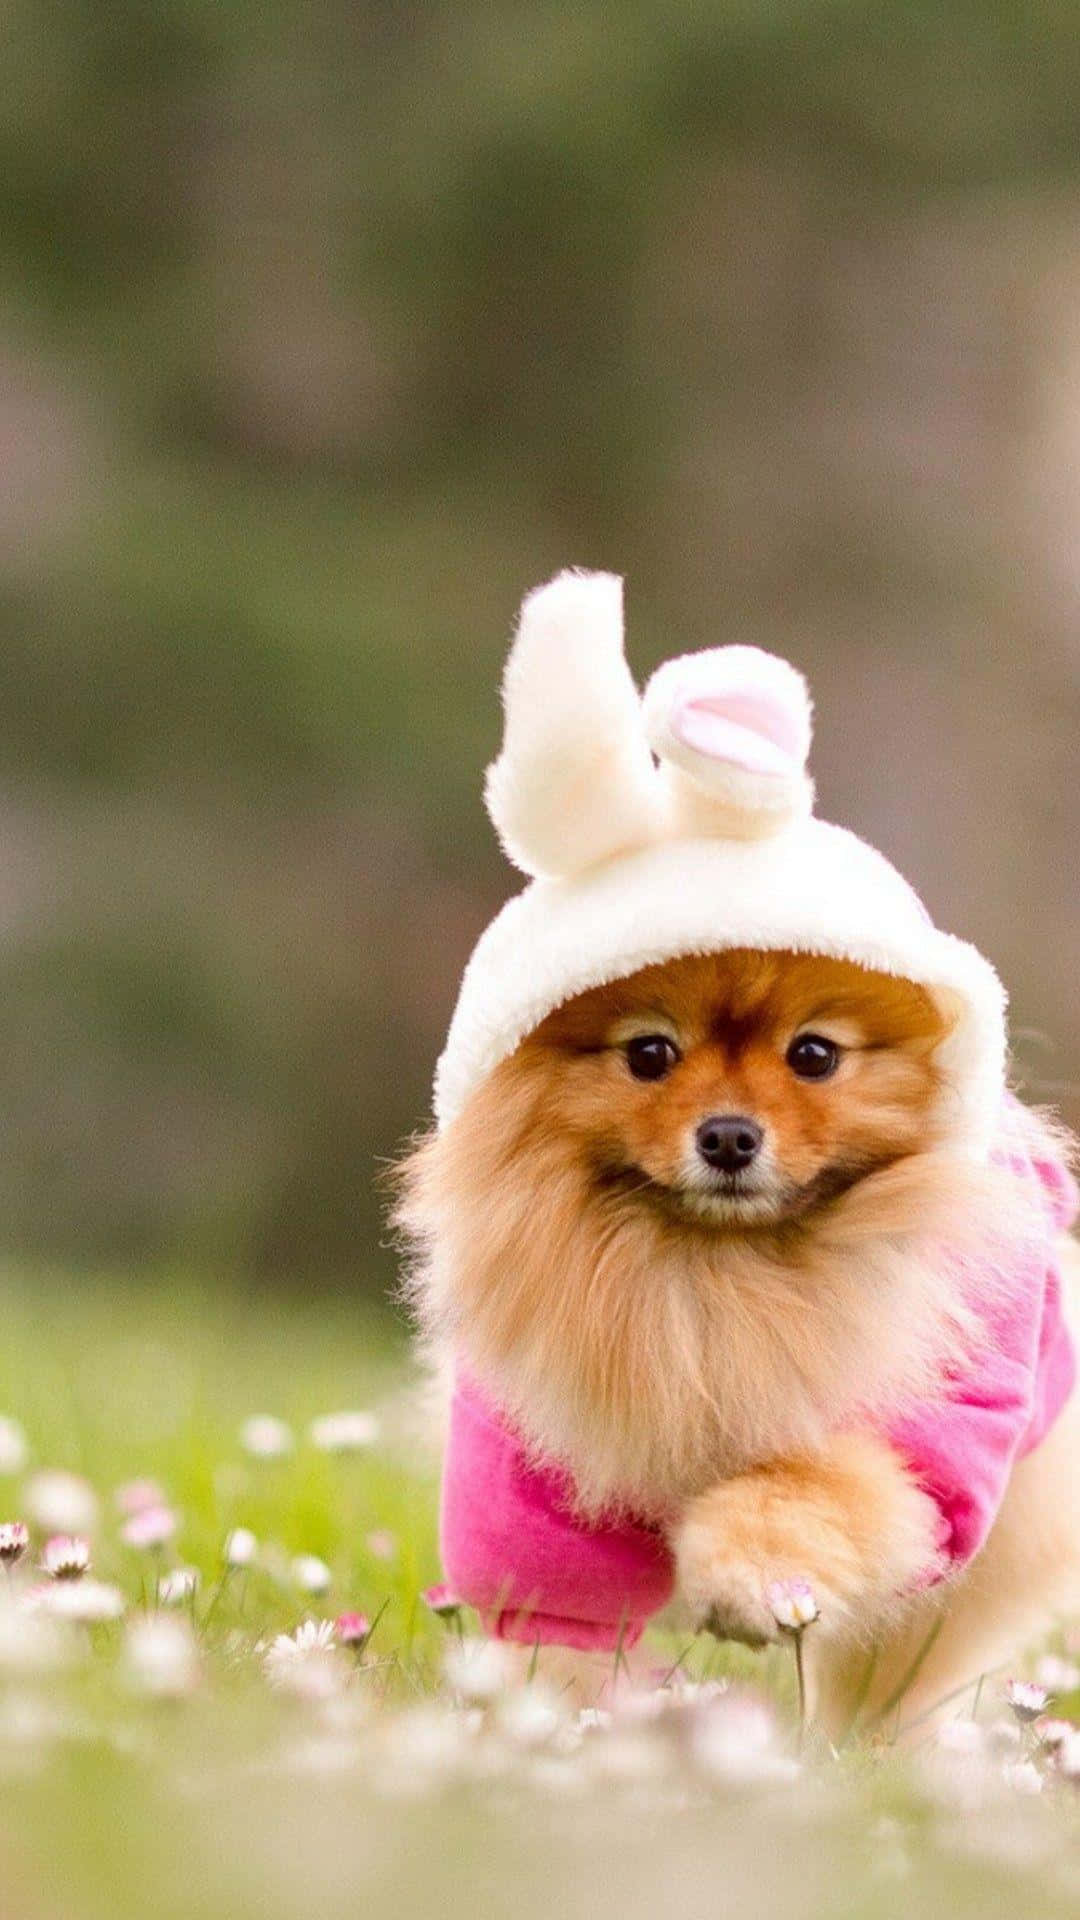 A Small Dog In A Pink Hat Running Through The Grass Wallpaper